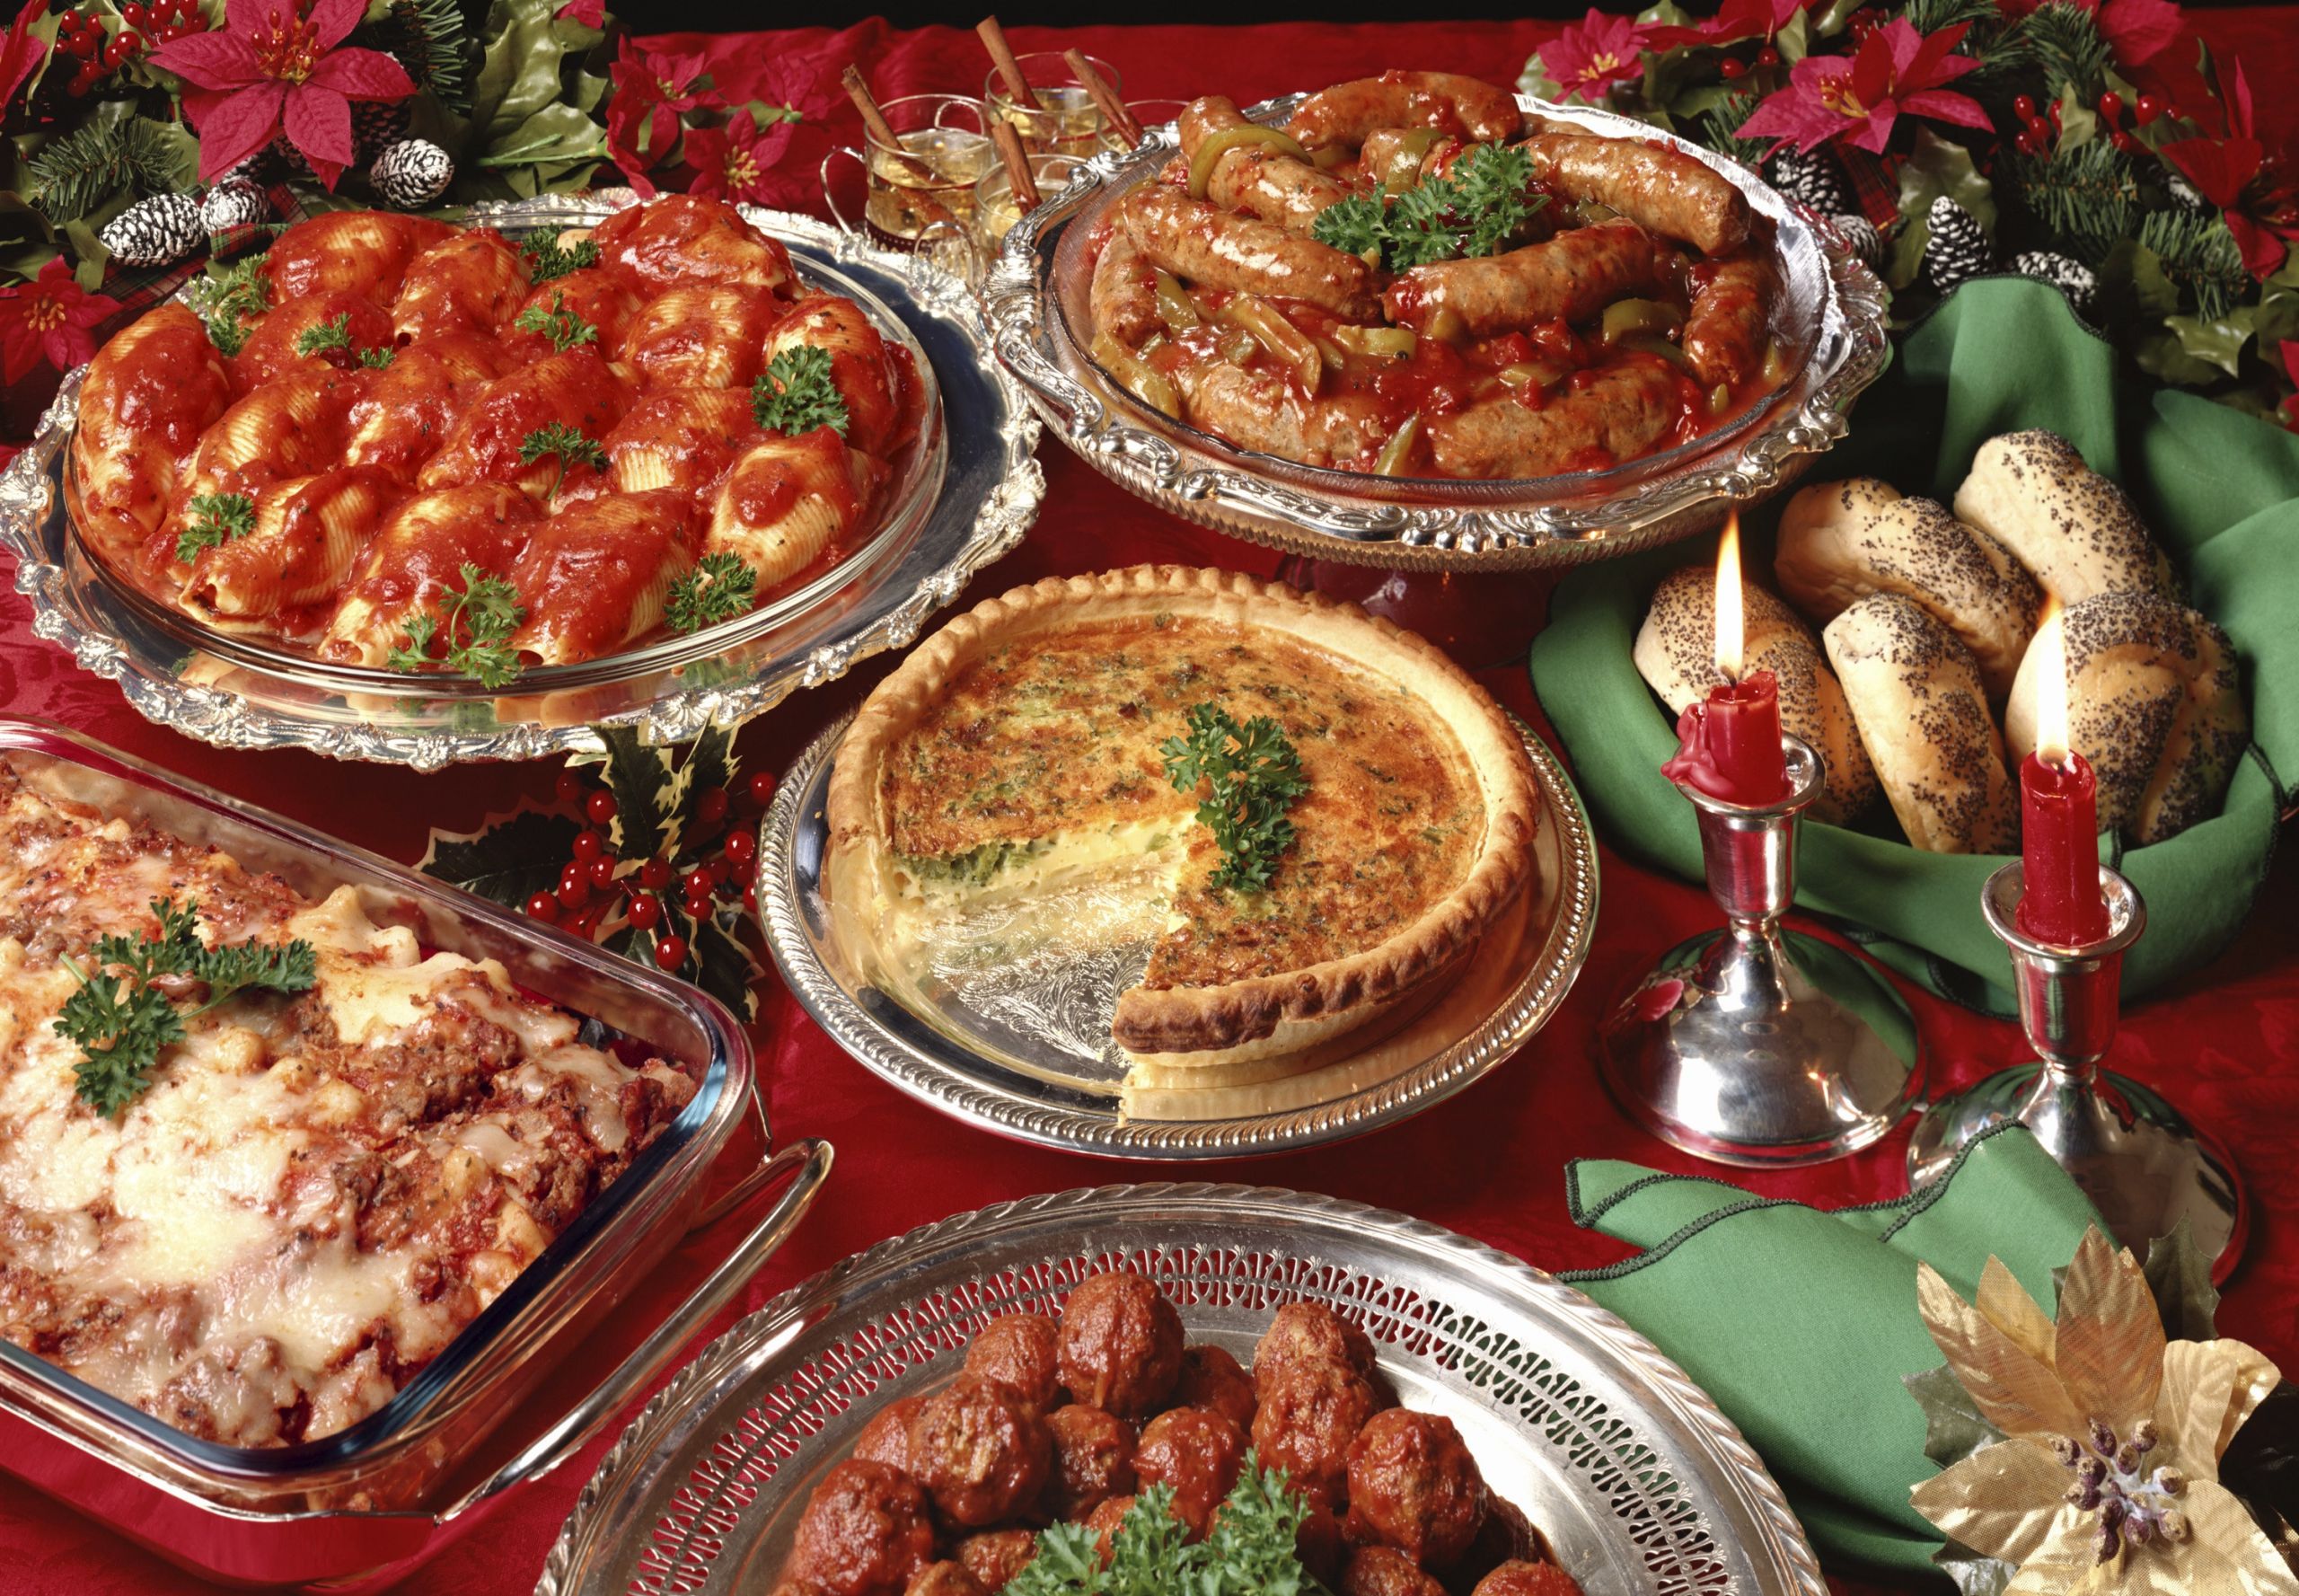 Italian Dinner Menu Ideas
 7 Tips to Get Through the Holidays without Overeating